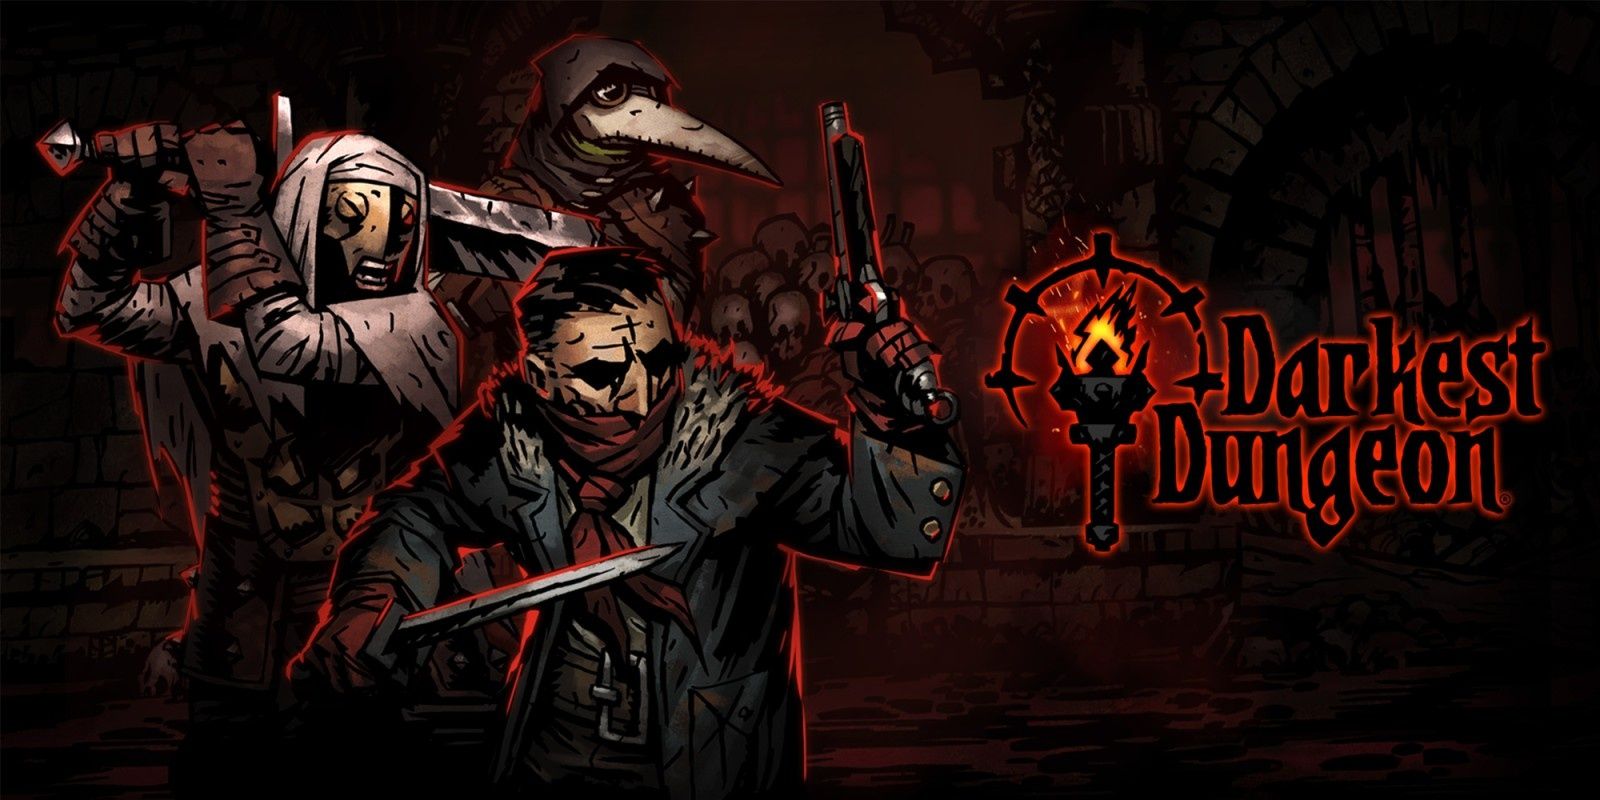 Three characters from Darkest Dungeon